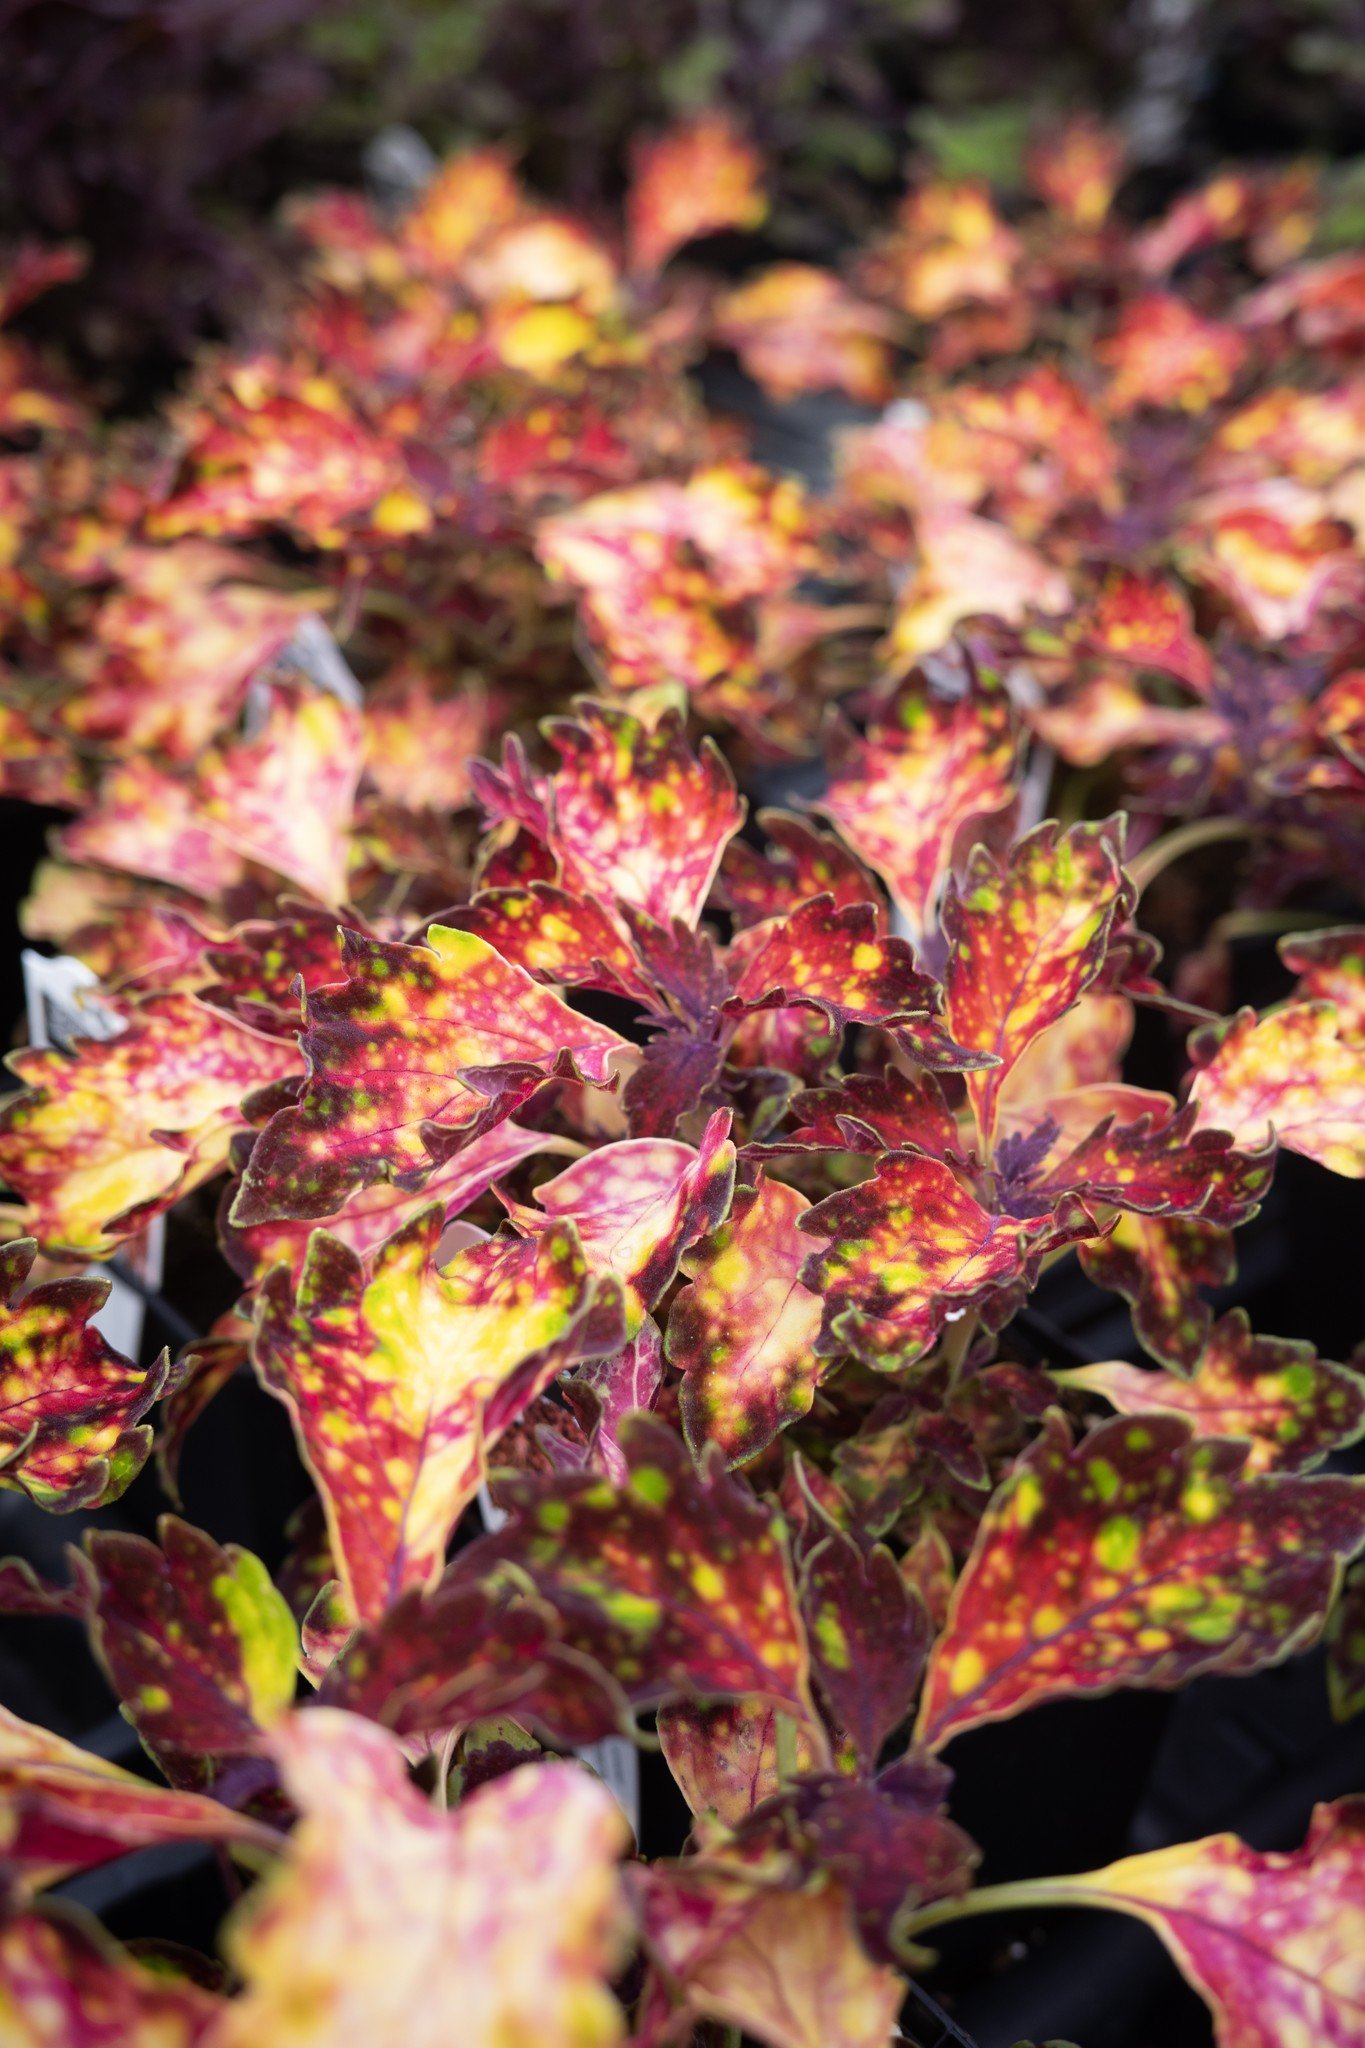 We've always been big fans of Coleus, but the Down Town Santa Monica cultivar looks incredible this season!